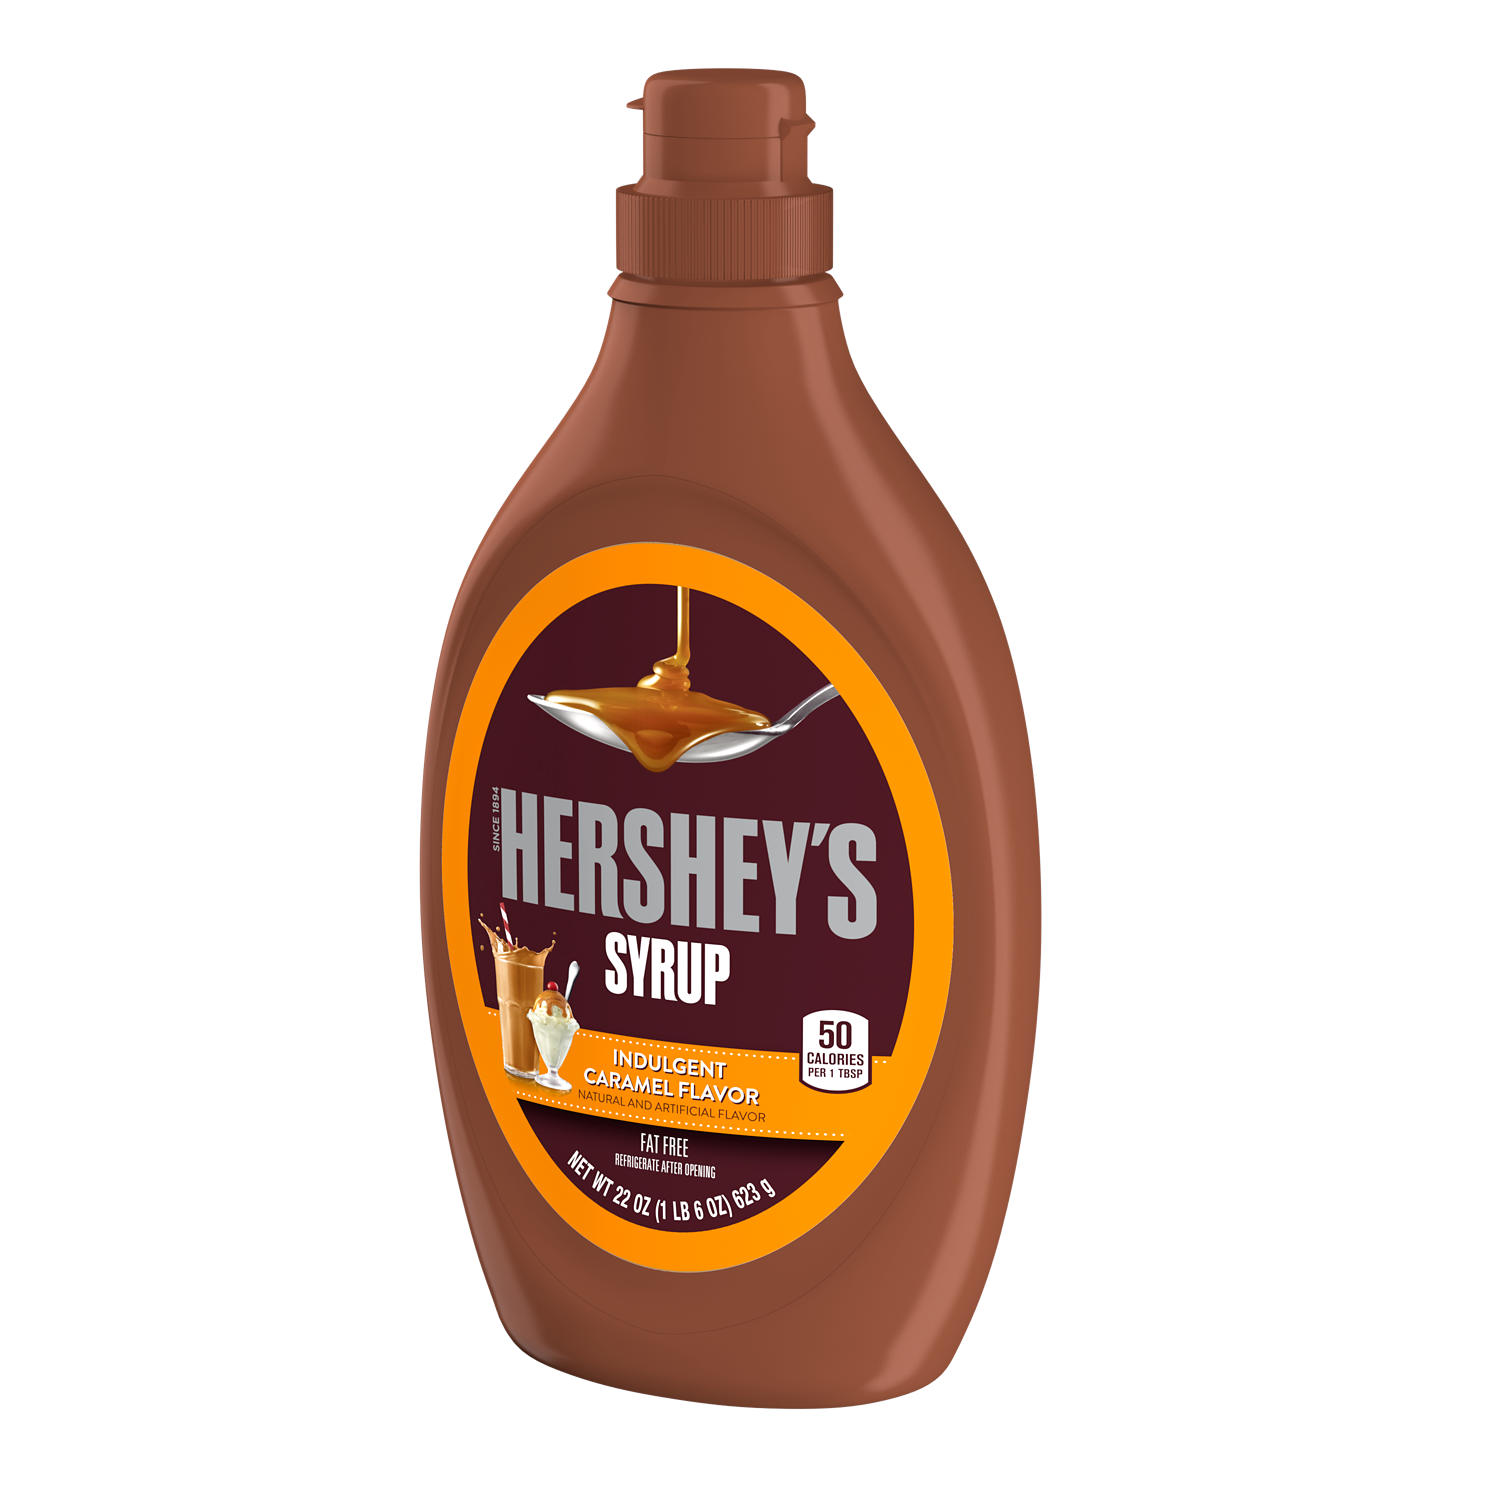 HERSHEY'S Caramel Syrup, 22 oz bottle - Right Side of Package